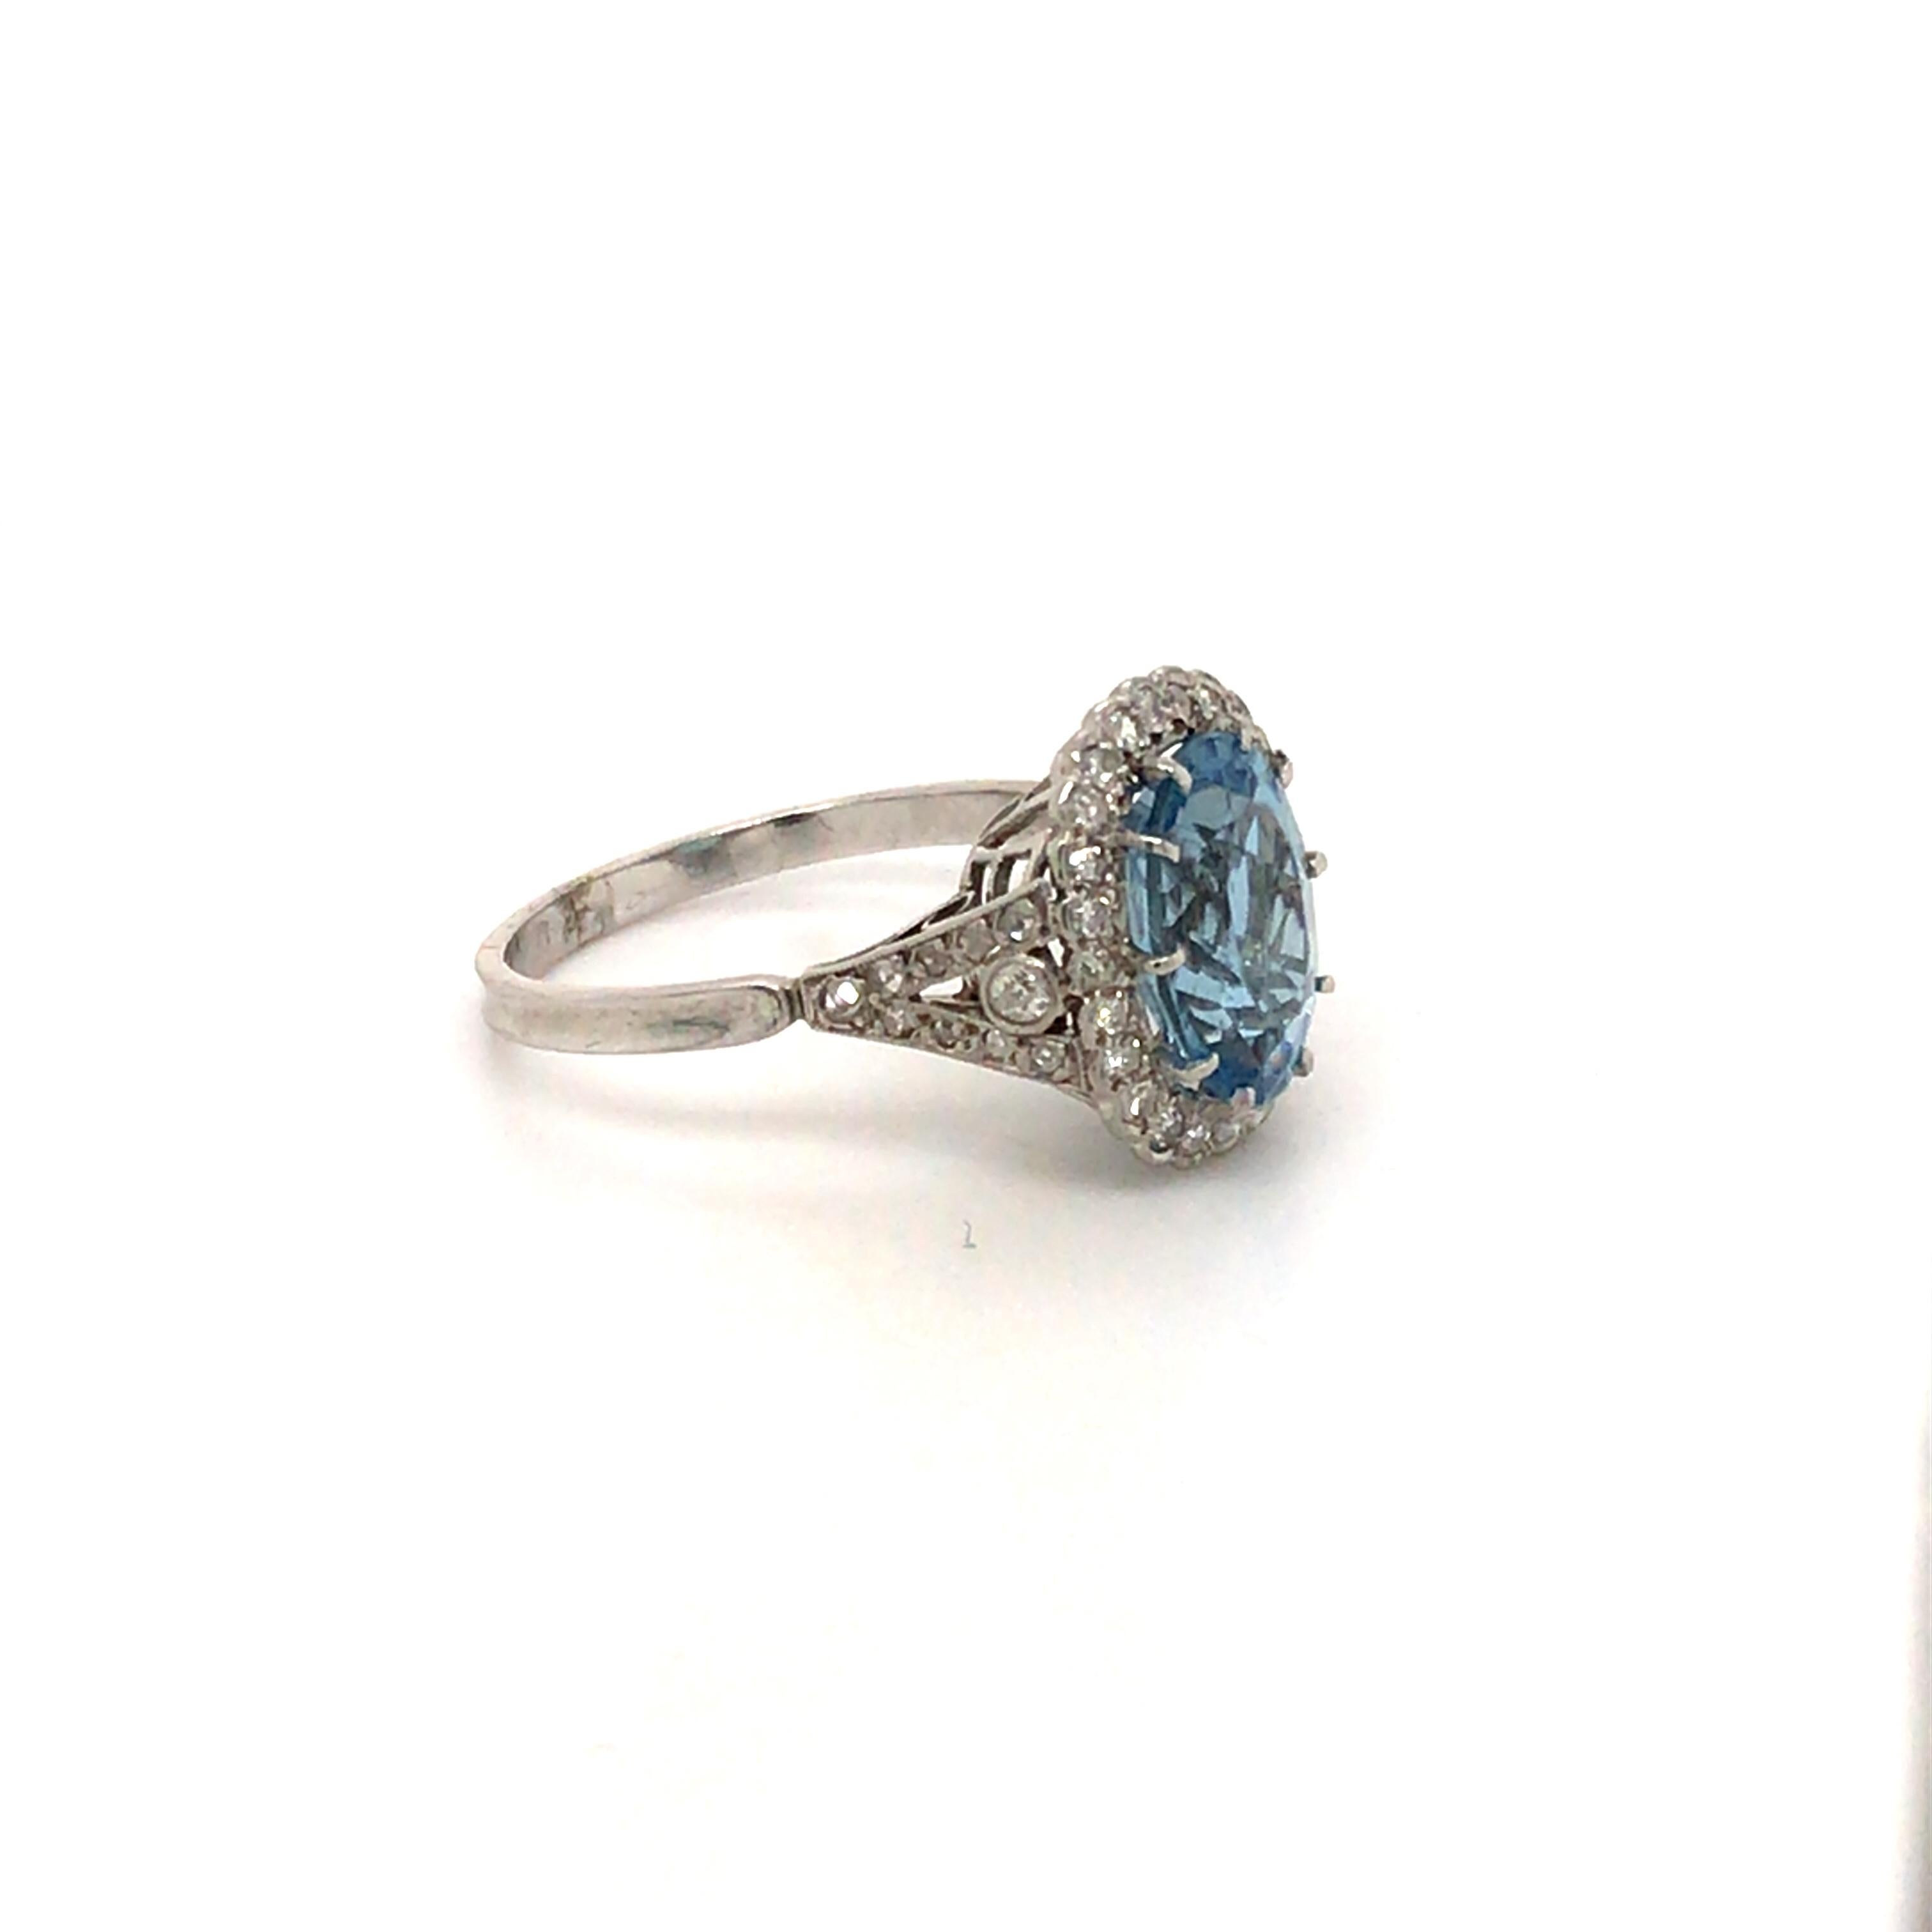 This fine oval Aquamarine is mounted in a hand made platinum setting with diamond scallop surround and old cut diamond diamond shoulders. 

Aquamarine - 3.20ct
Old Cut Diamonds - 46 total approx 0.70ct
